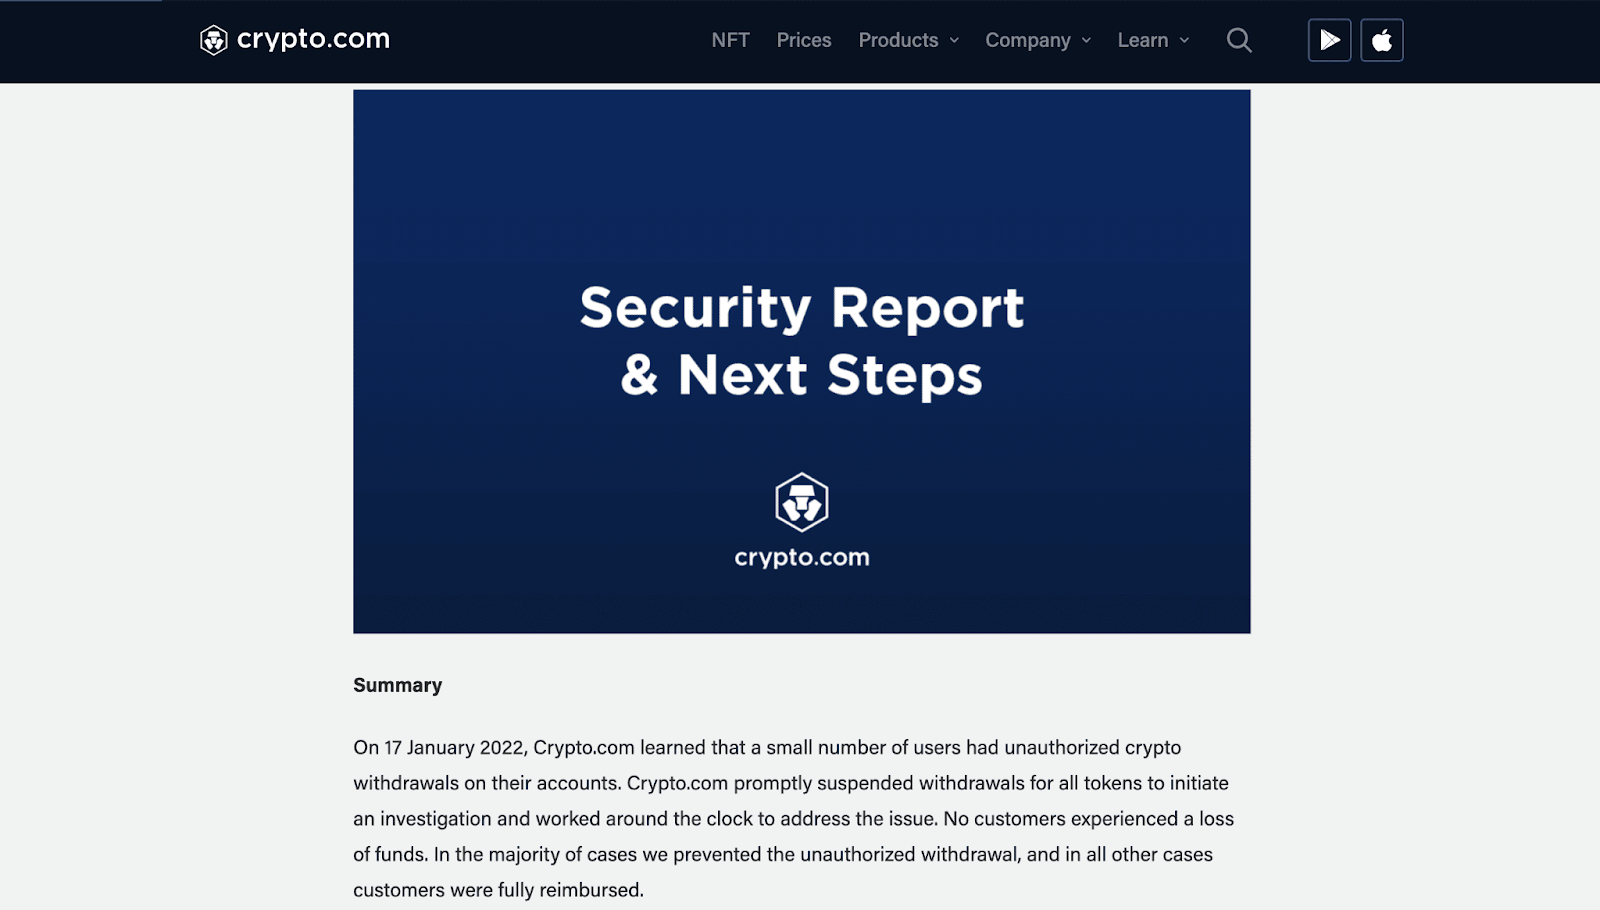 crypto.com website with the customer advisory following the cyberattack